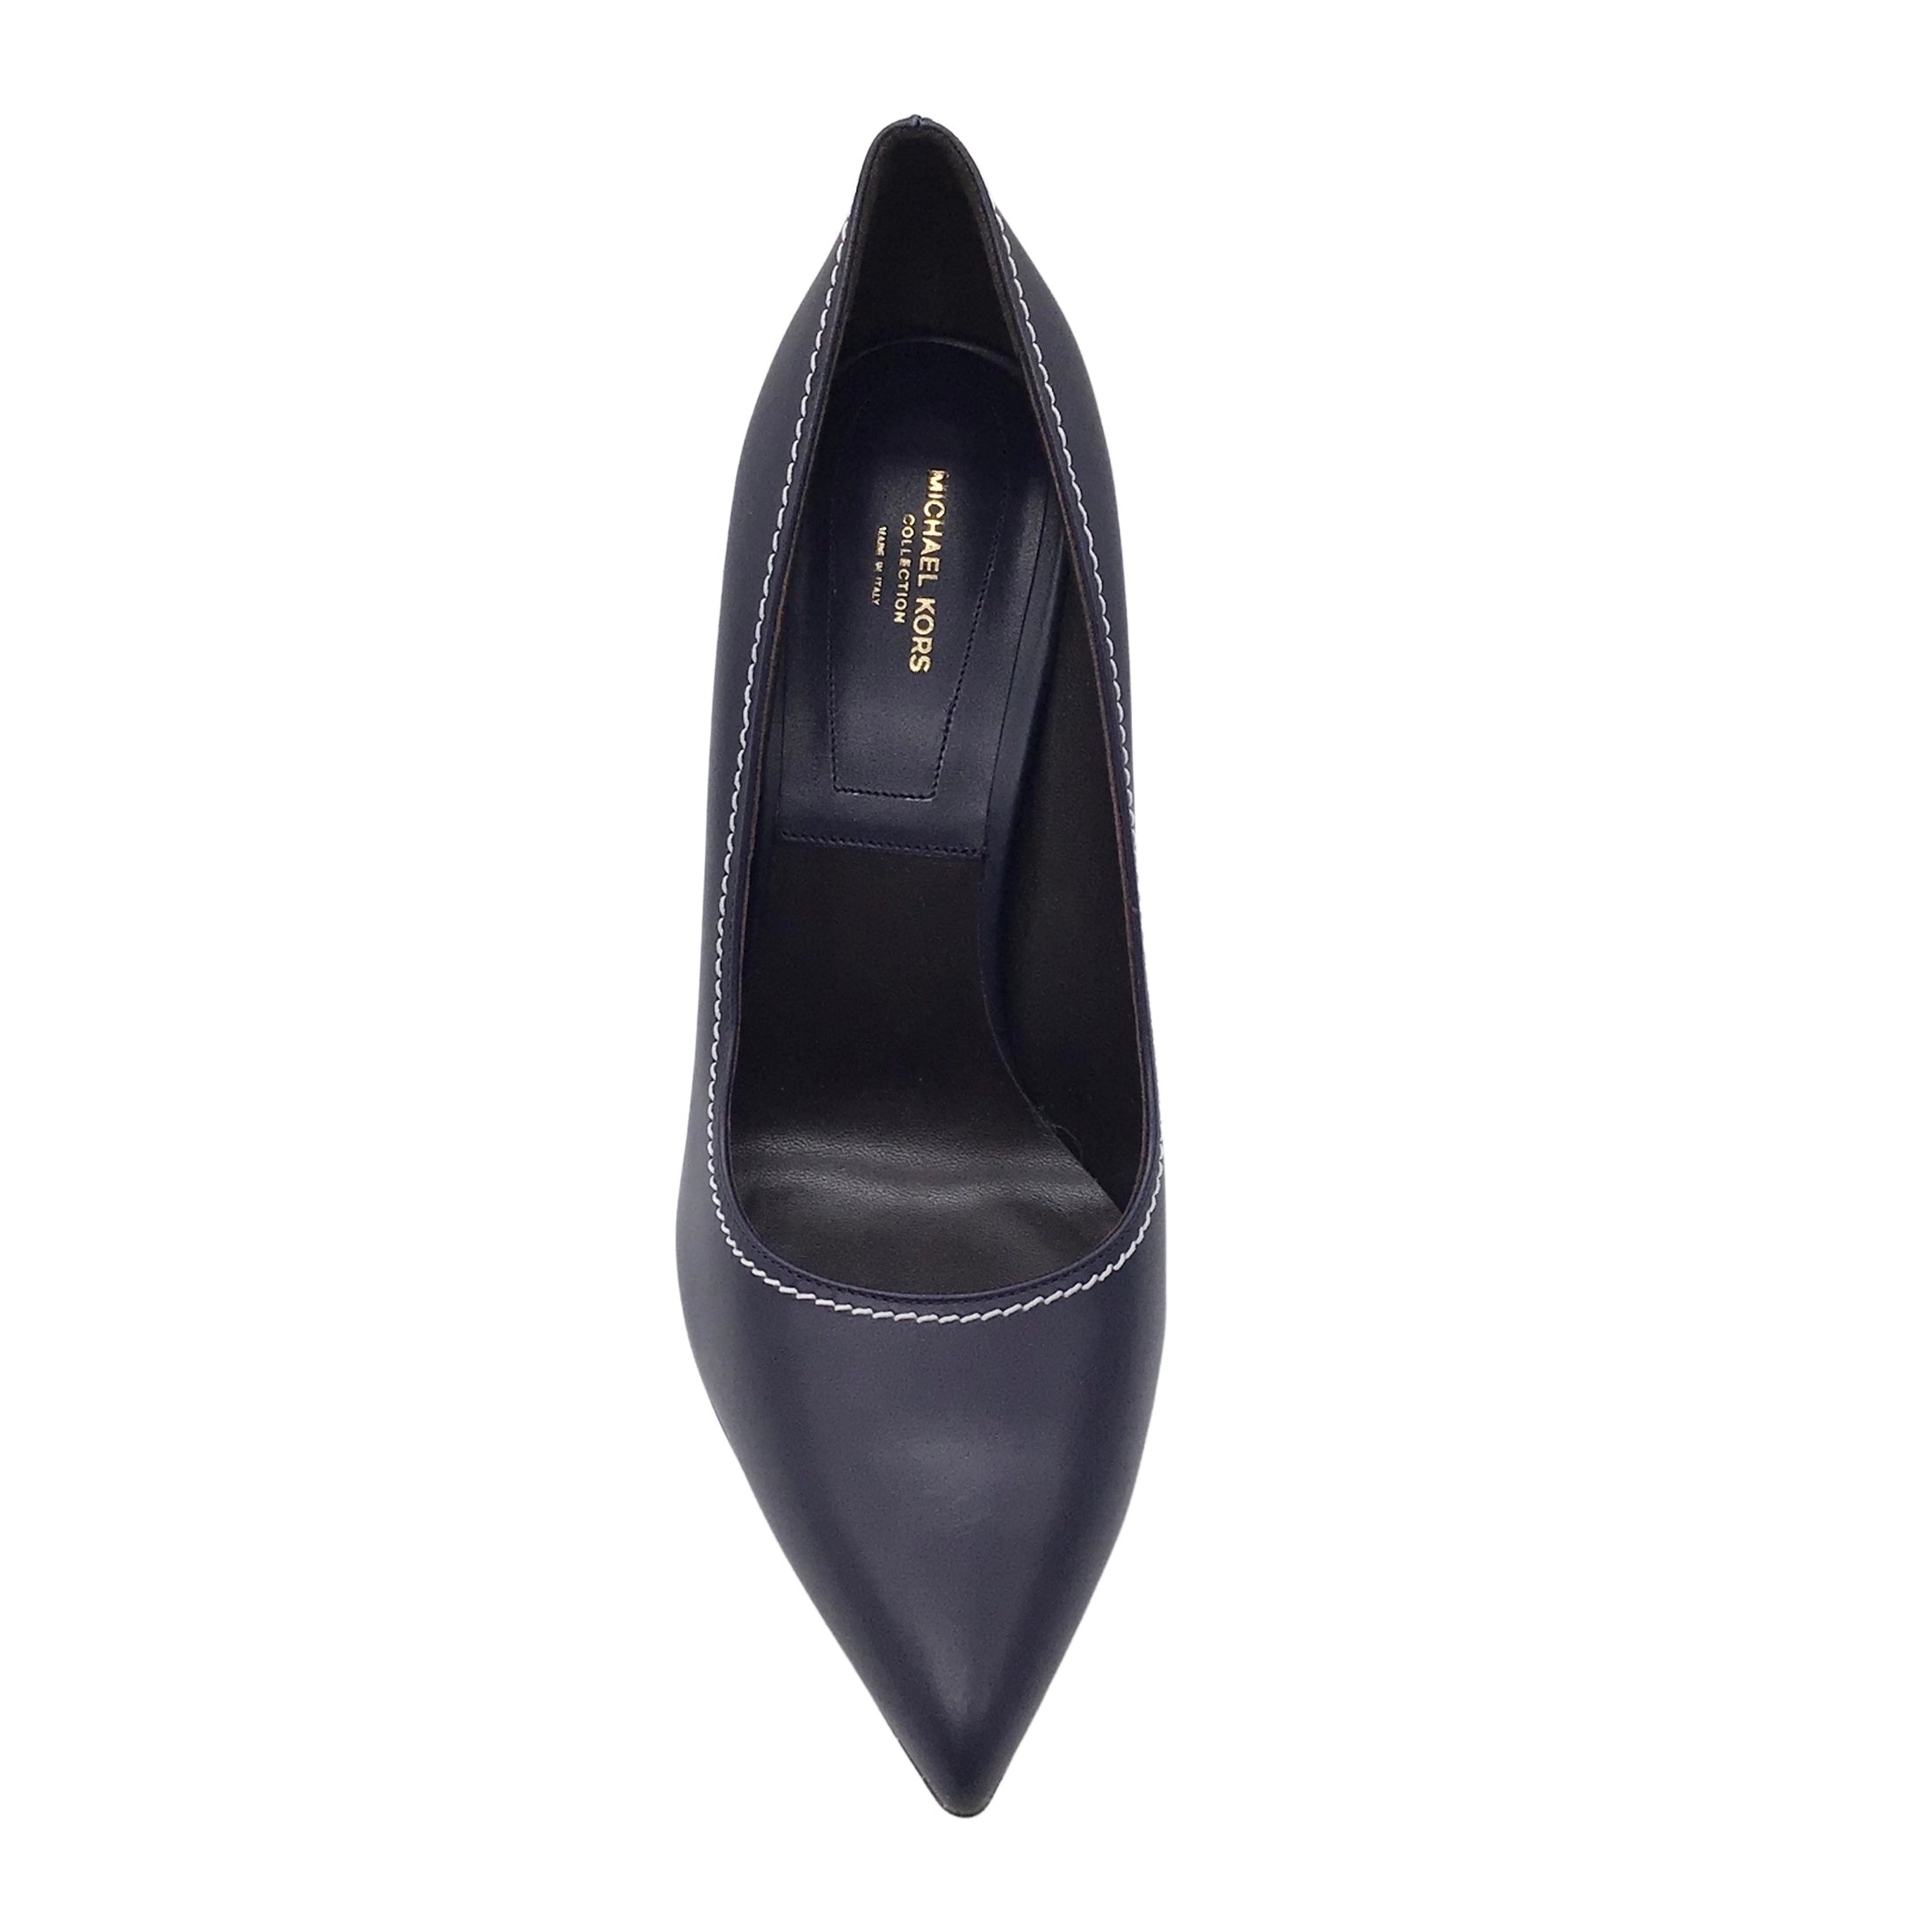 Michael Kors Collection Navy Blue / White Contrast Stitching Pointed Toe Leather Pumps